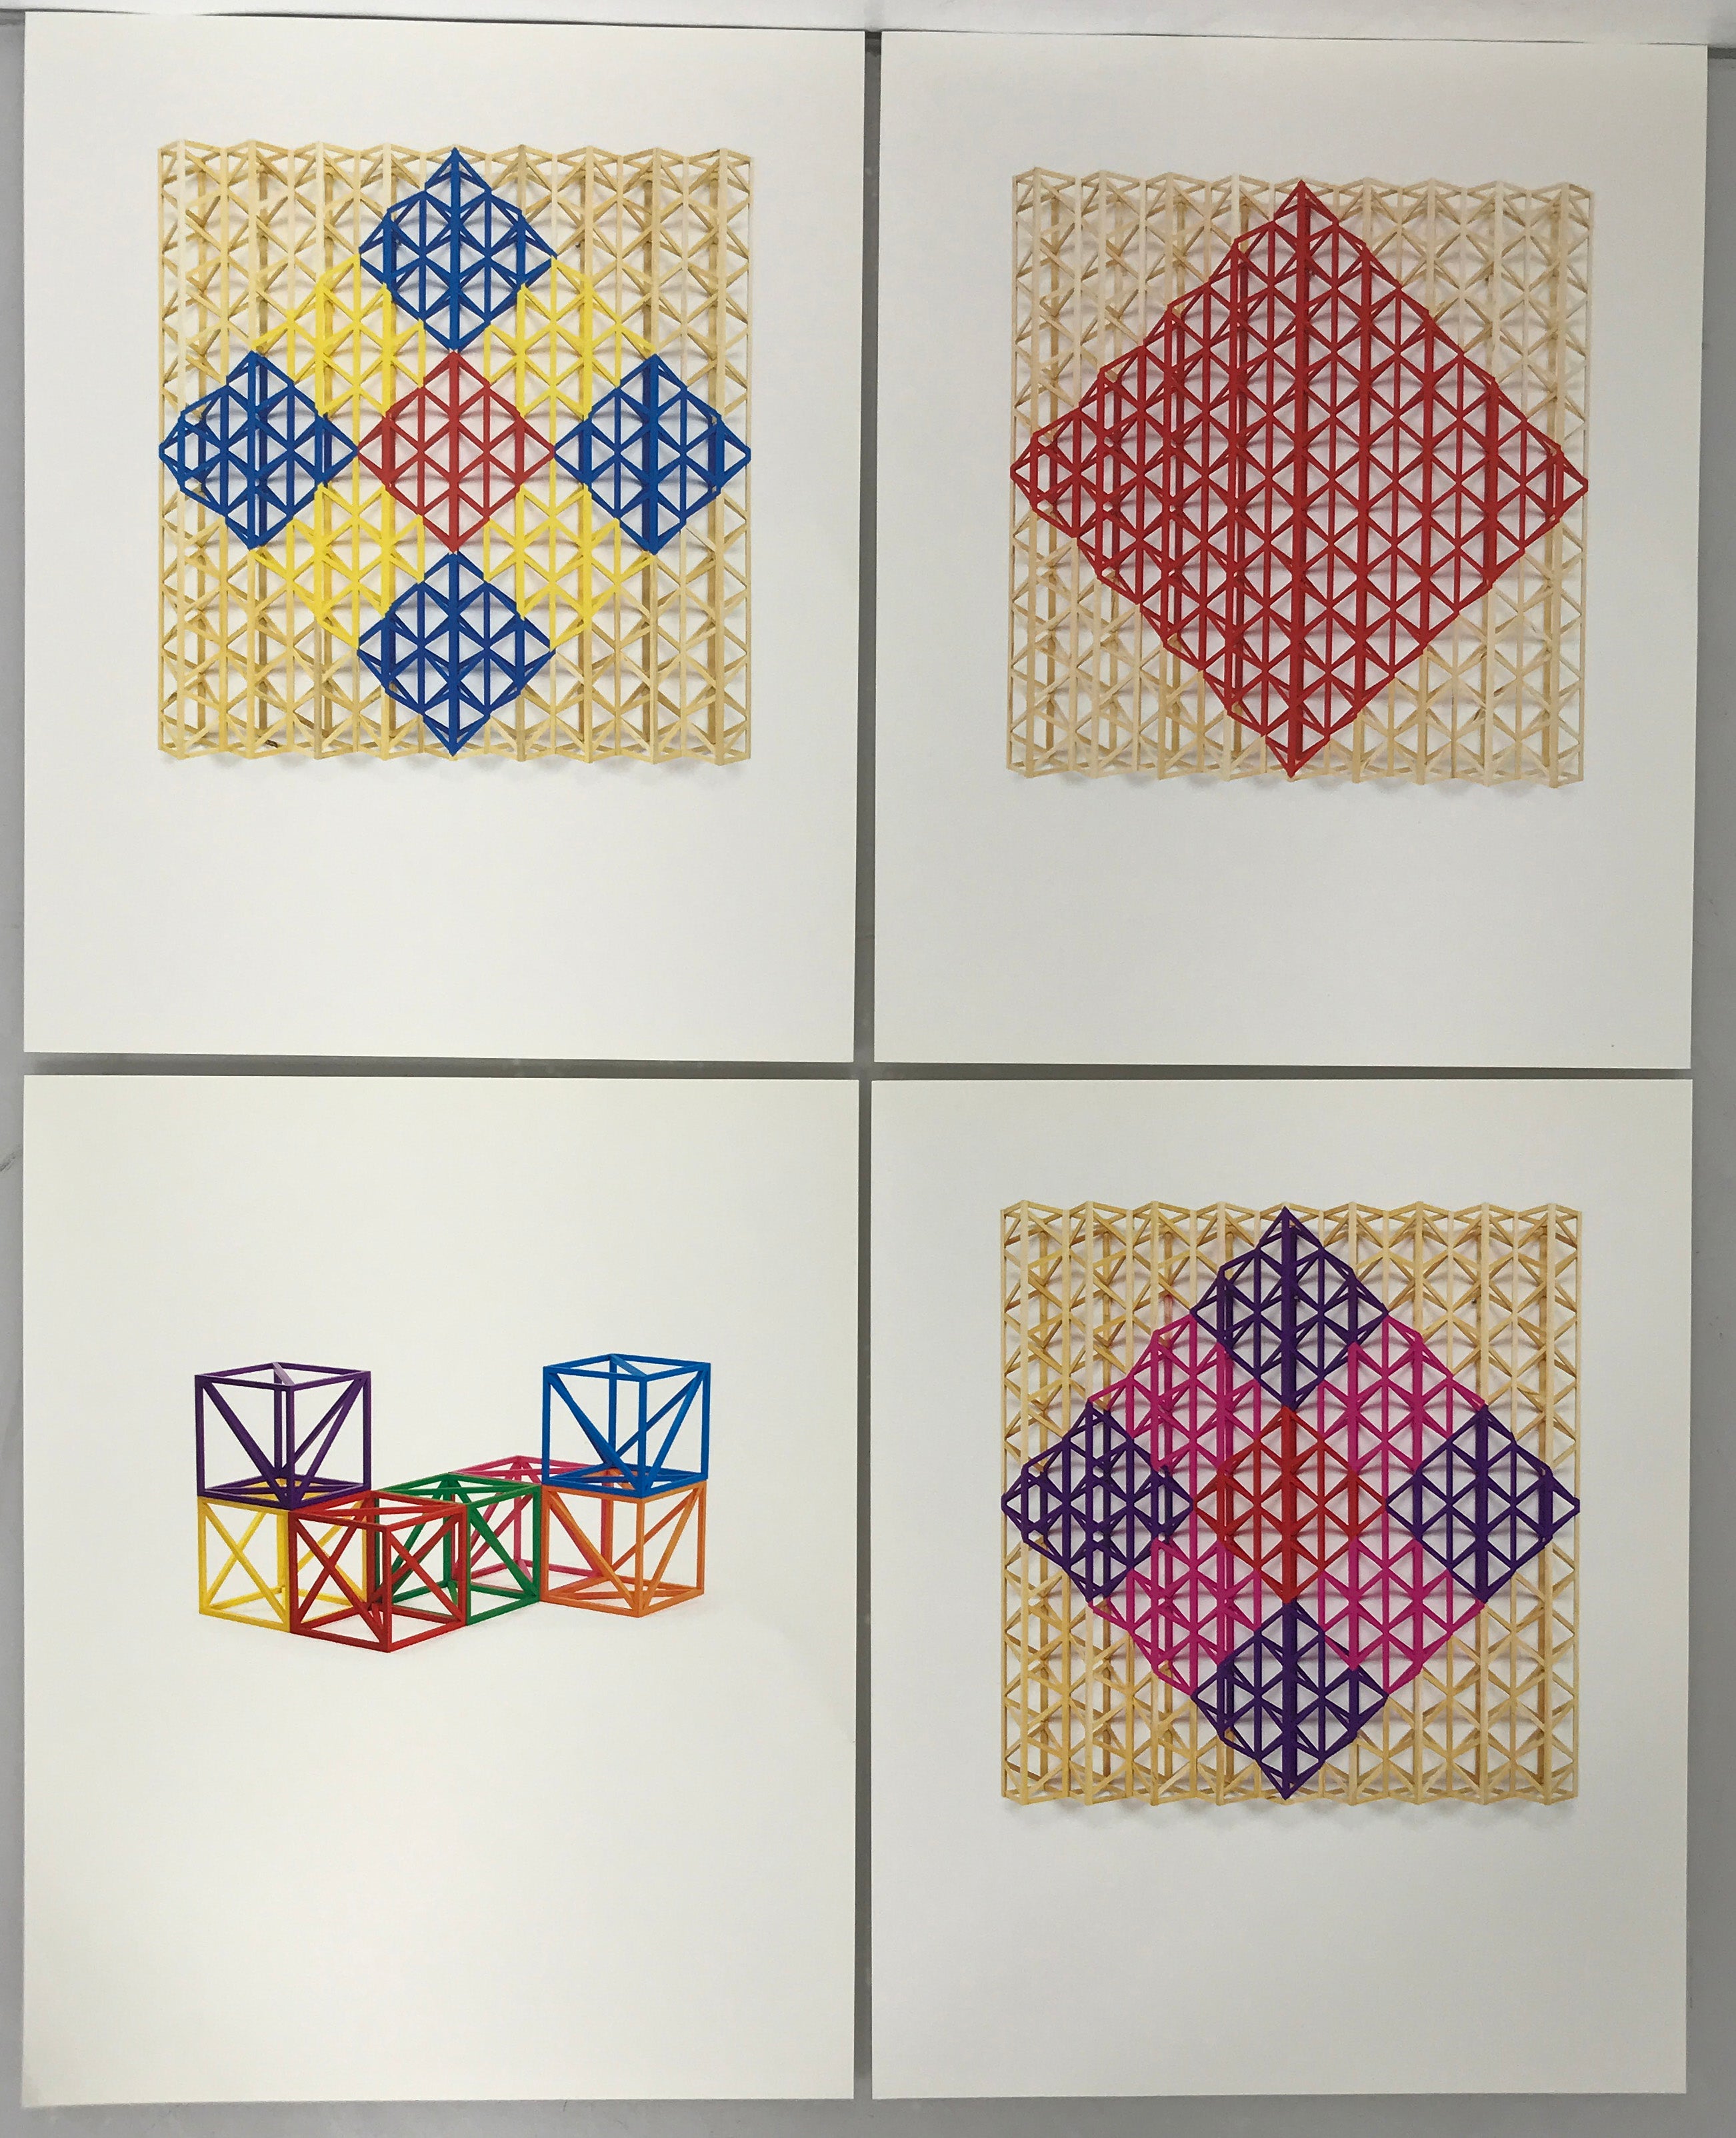 Set of Prints from Rasheed Araeen's "Going East"